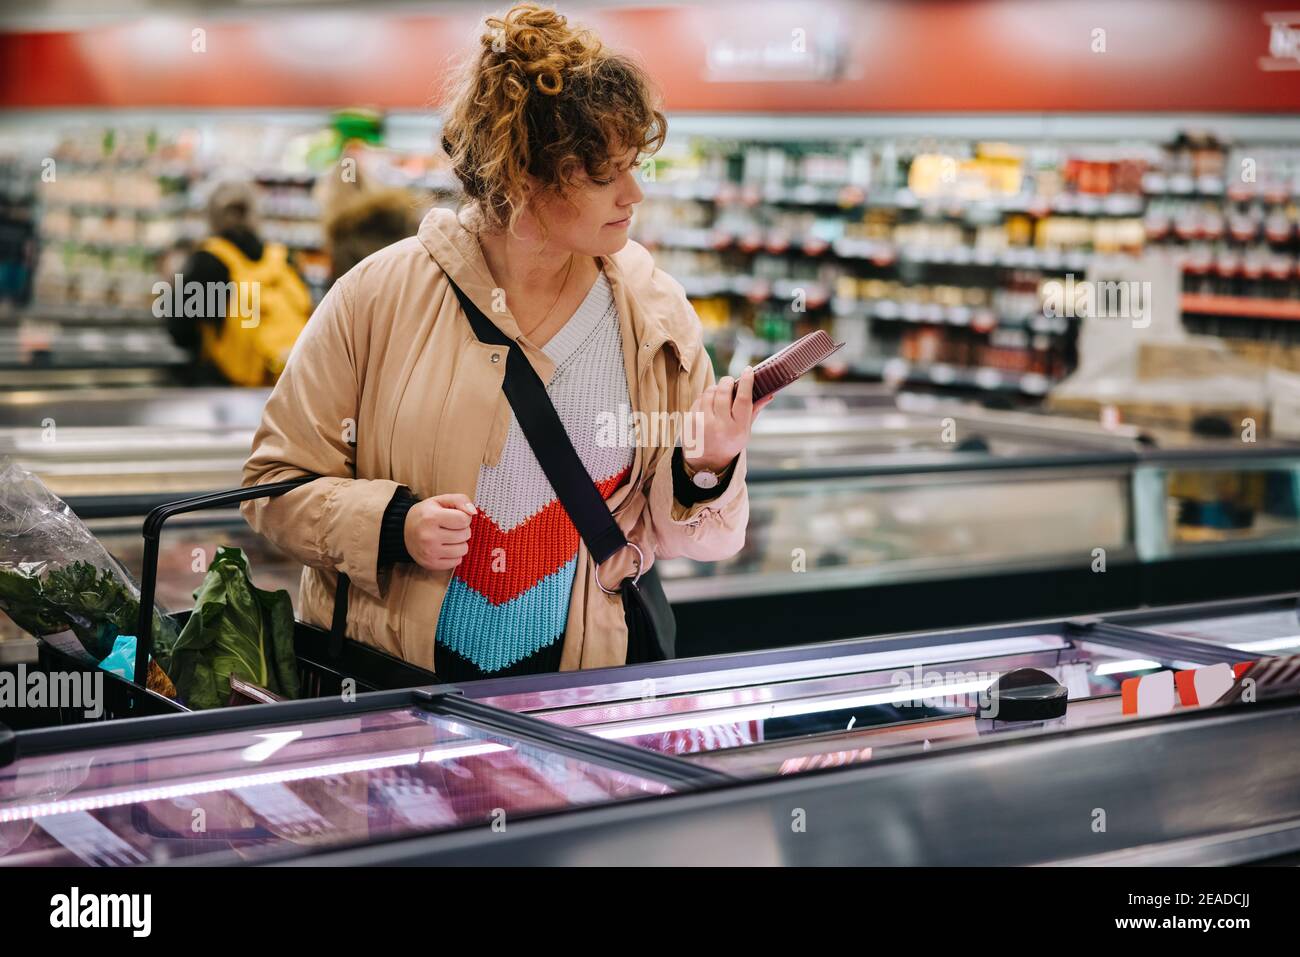 Woman at grocery store reading food labels. Female customer reading product information at supermarket. Stock Photo